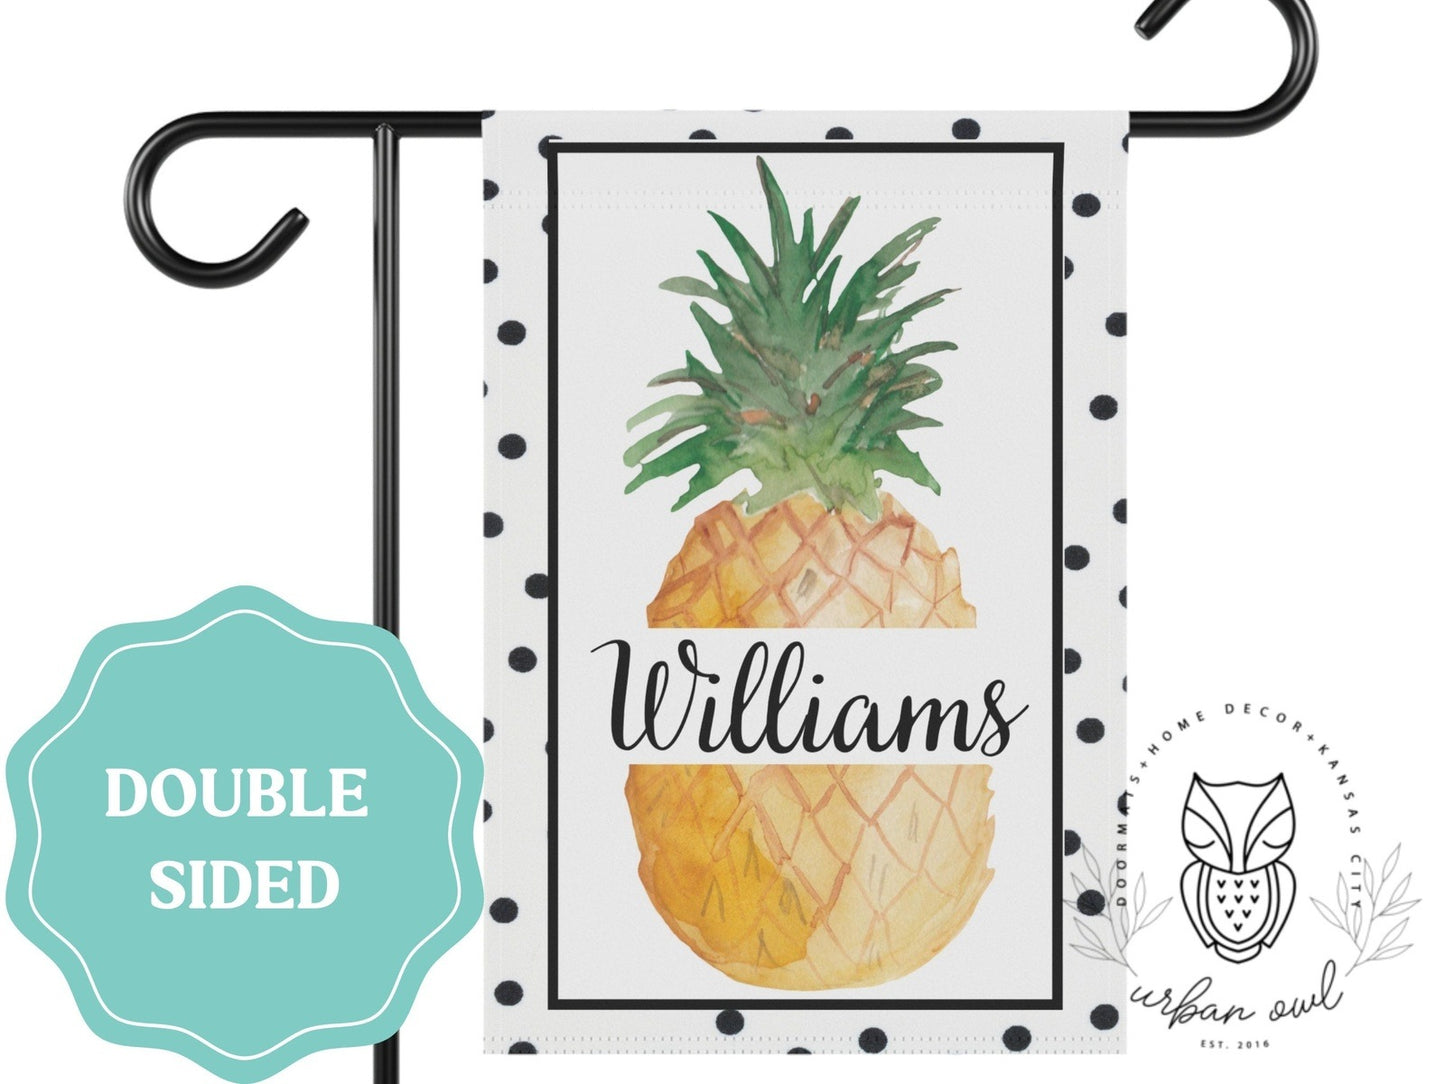 Personalized Name Pineapple and Polka Dot Garden Flag